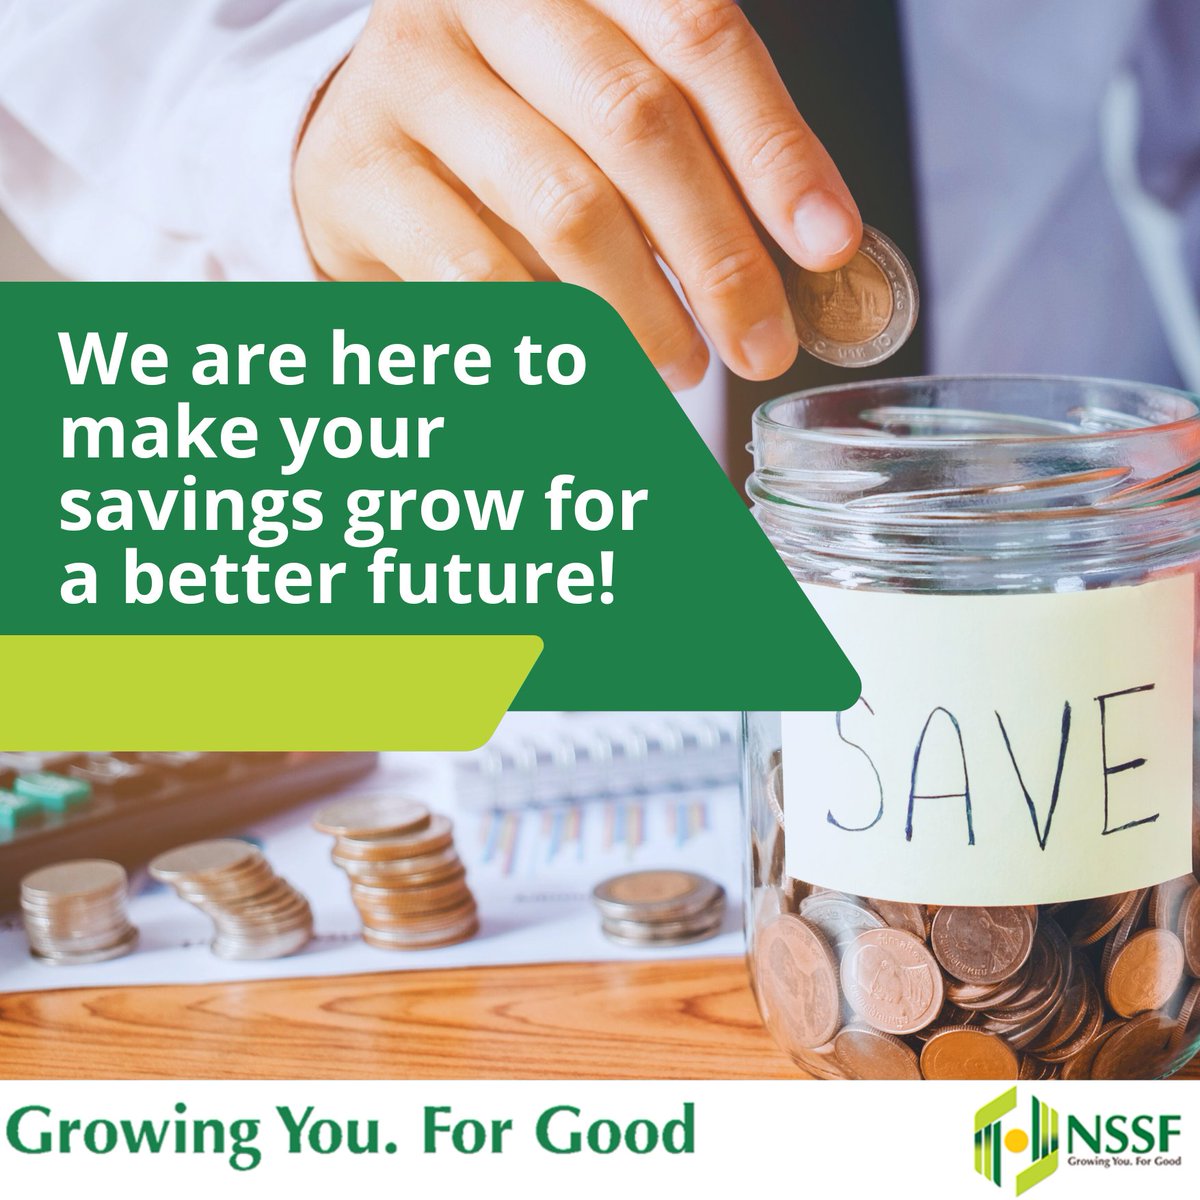 NSSF Kenya does not discriminate against income or status. All are welcome; whether employed or unemployed. Start saving with us today with the little you have and let us make you grow! #LeavingNoOneBehind